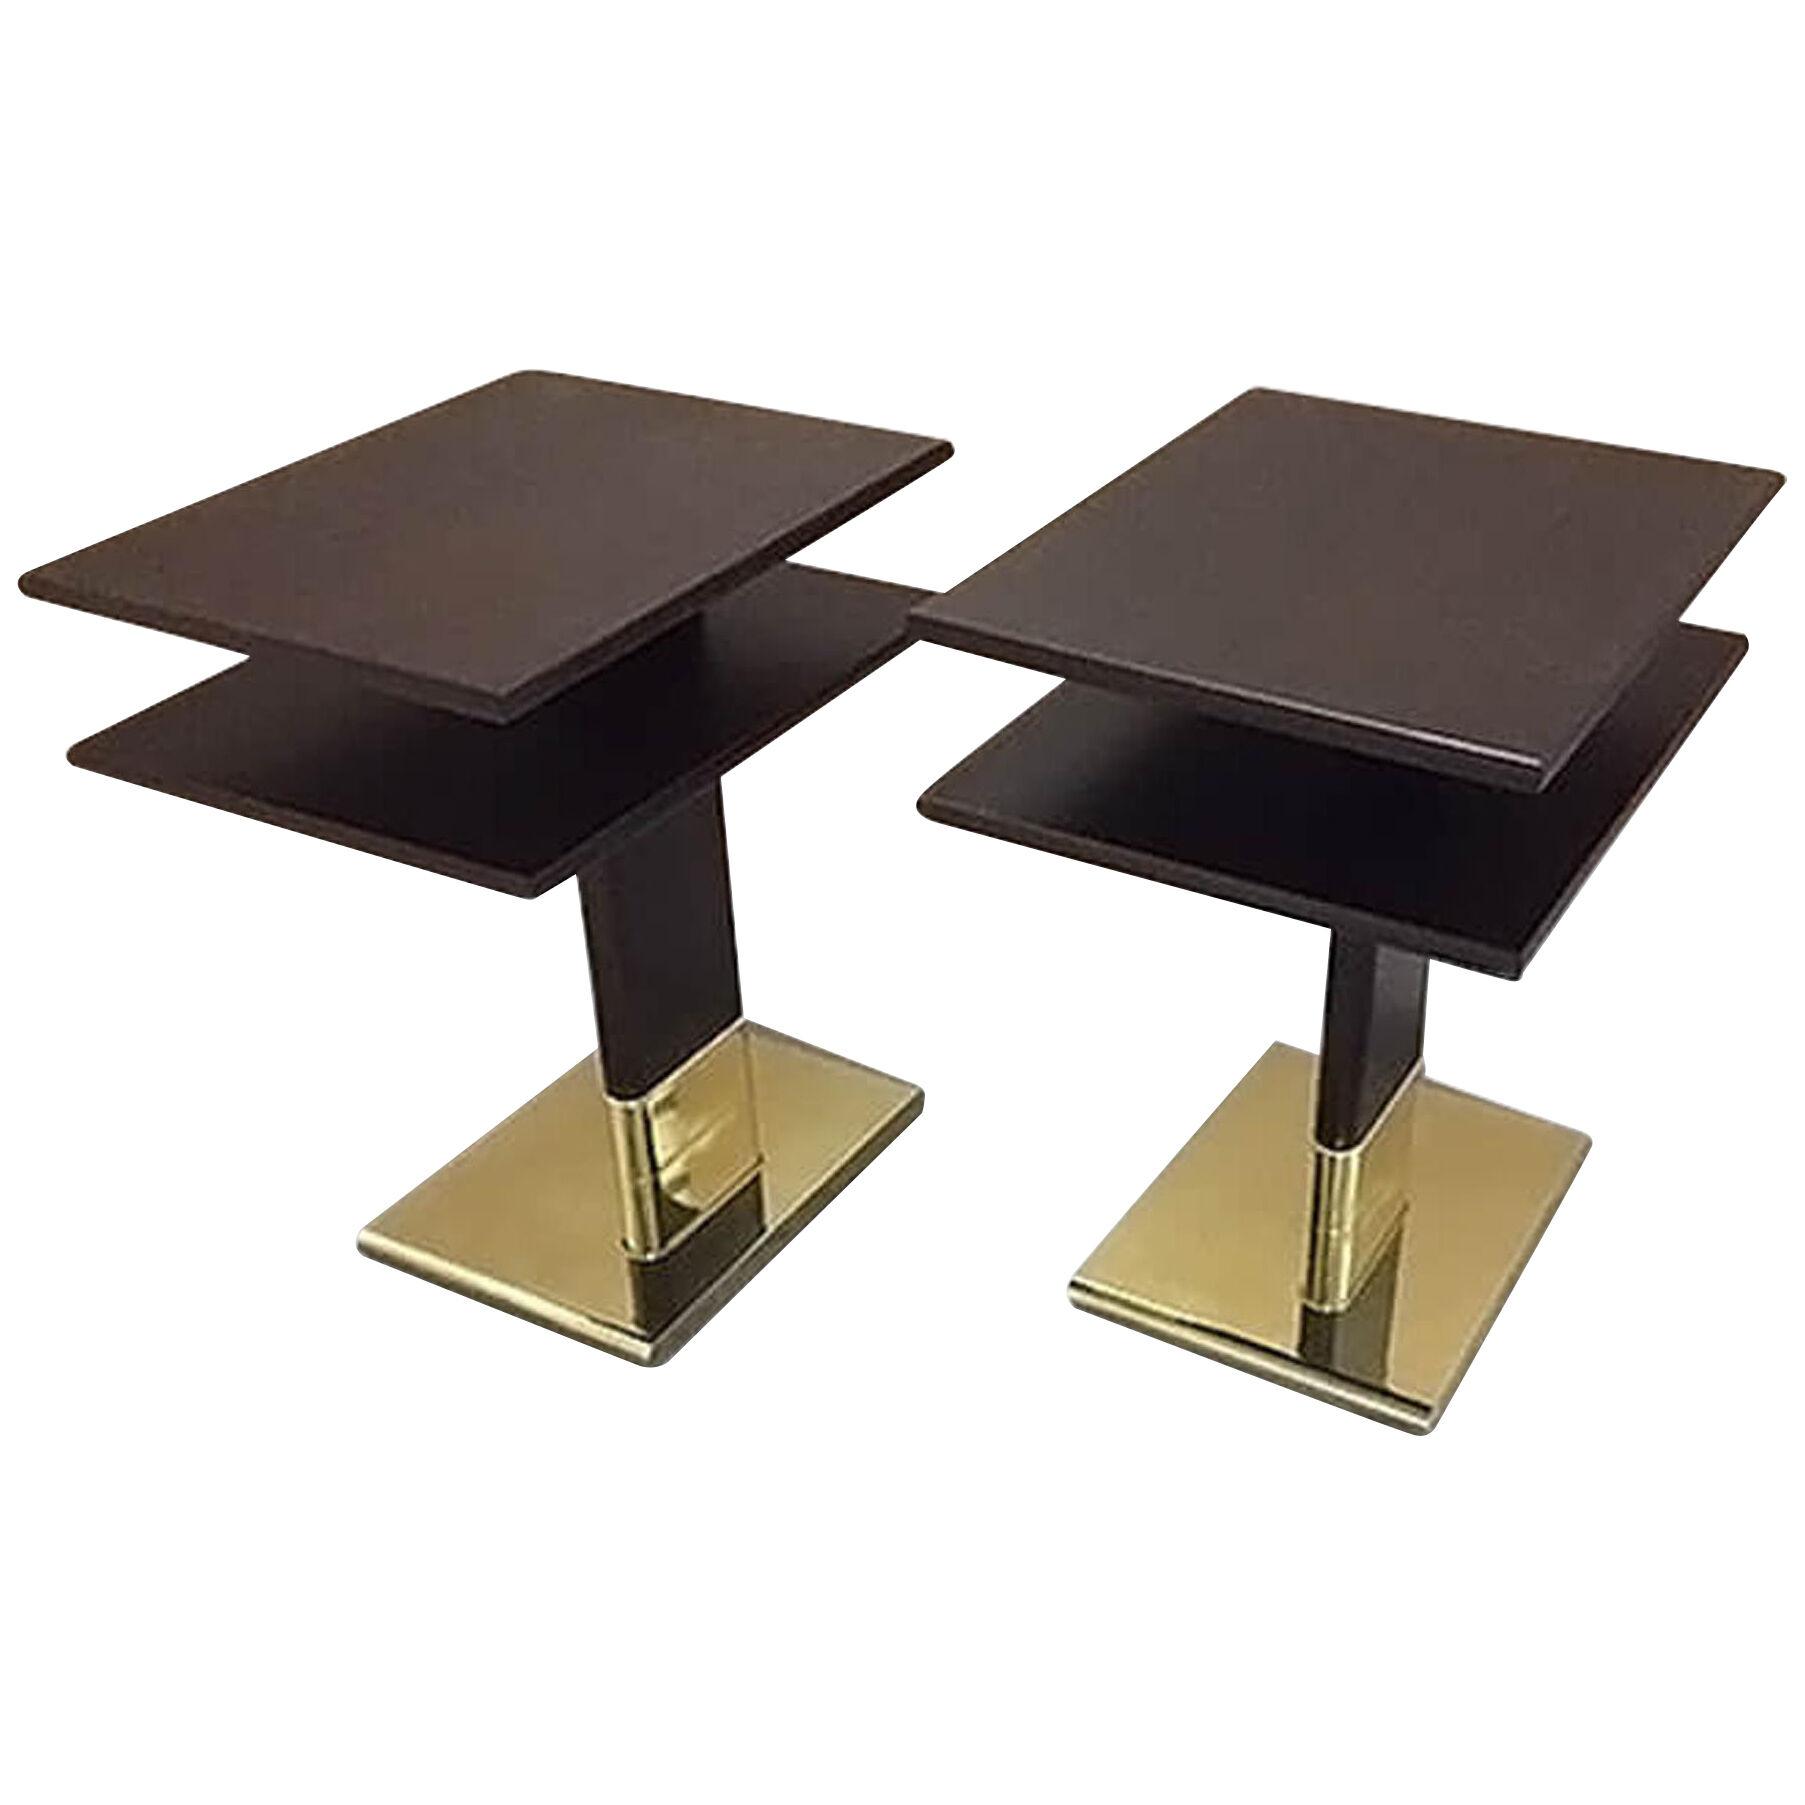 Pair of Art Deco inspired End Tables